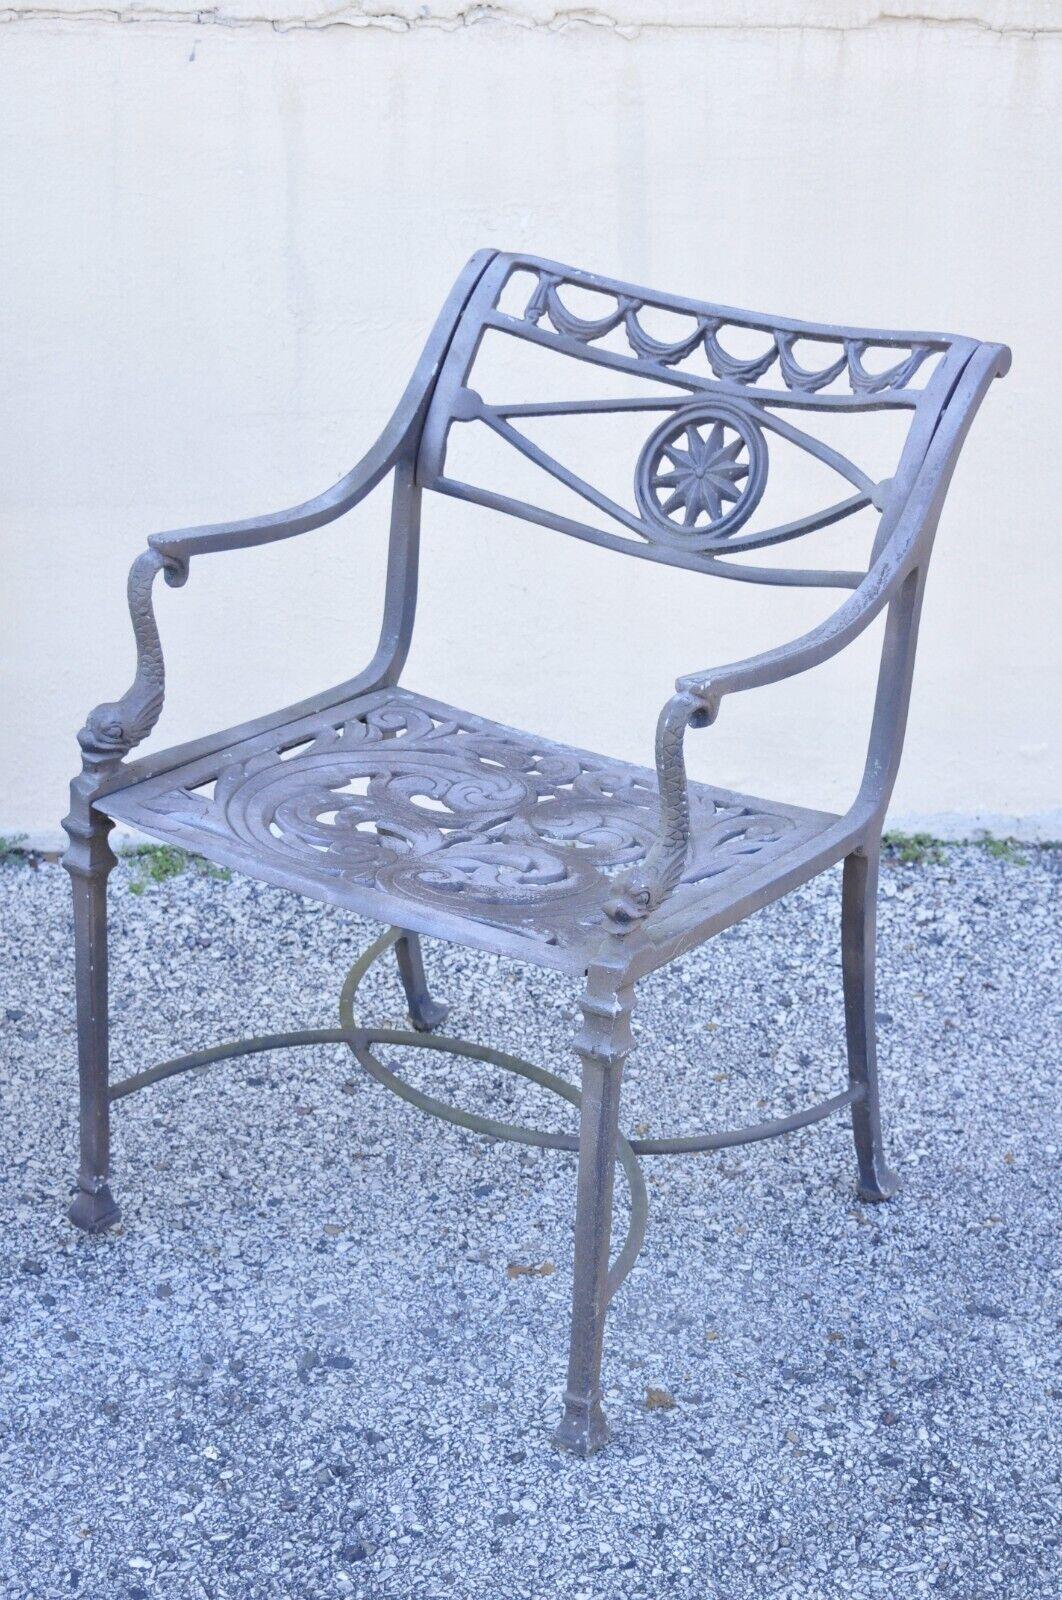 Iron Neoclassical Style Molla Style Dolphin Cast Aluminum Patio Settee & Chairs 3 Pcs